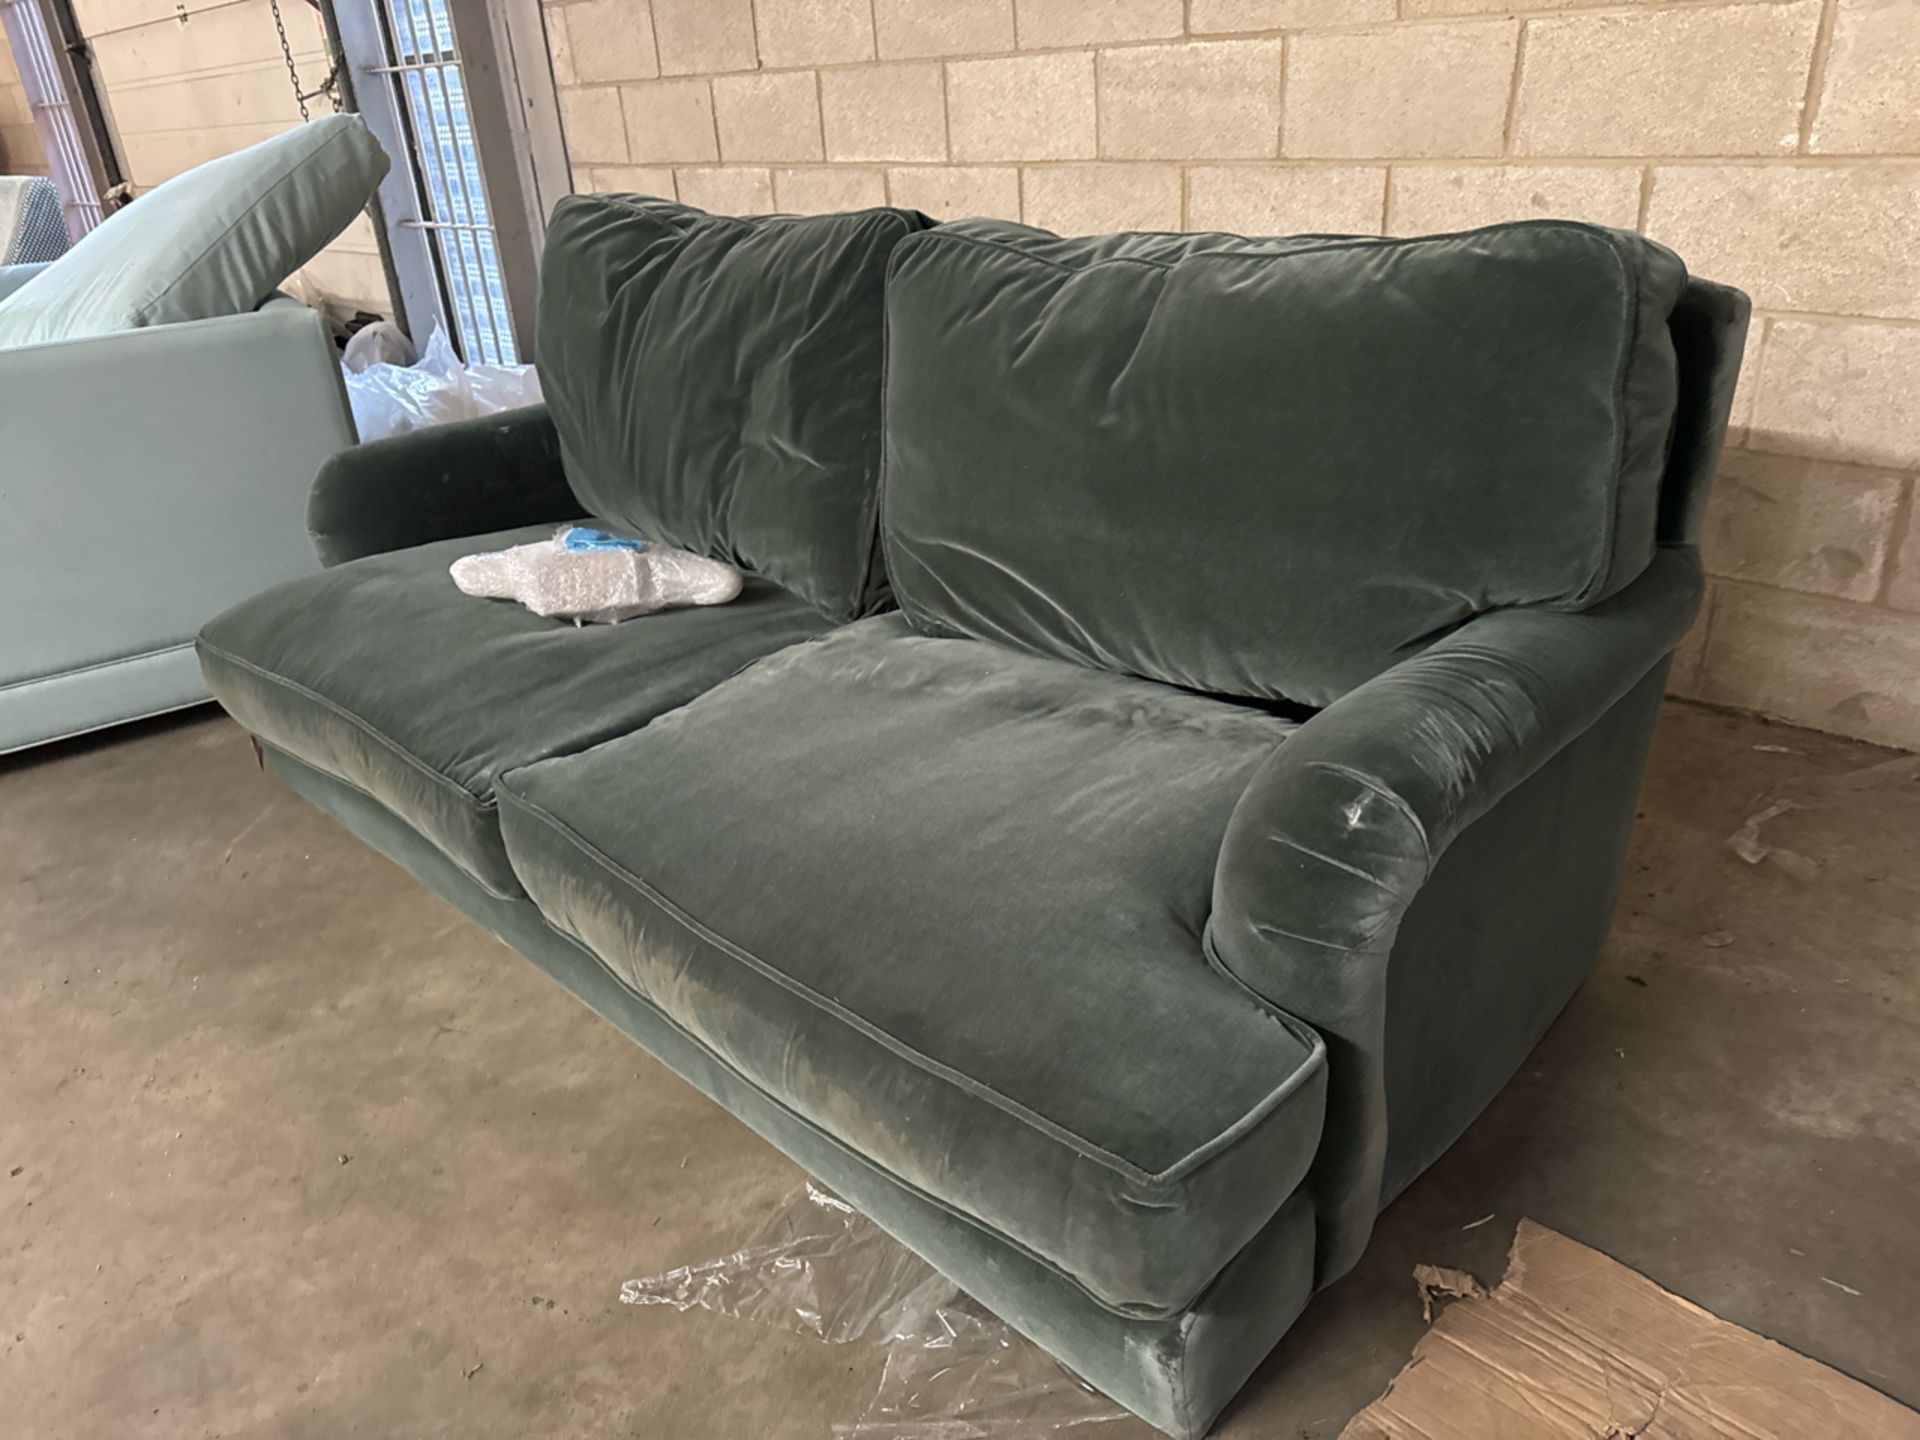 Bluebell 2.5 Seat Sofa In Smokey Green Cashmere Velvet RRP - £3500 - Image 3 of 6